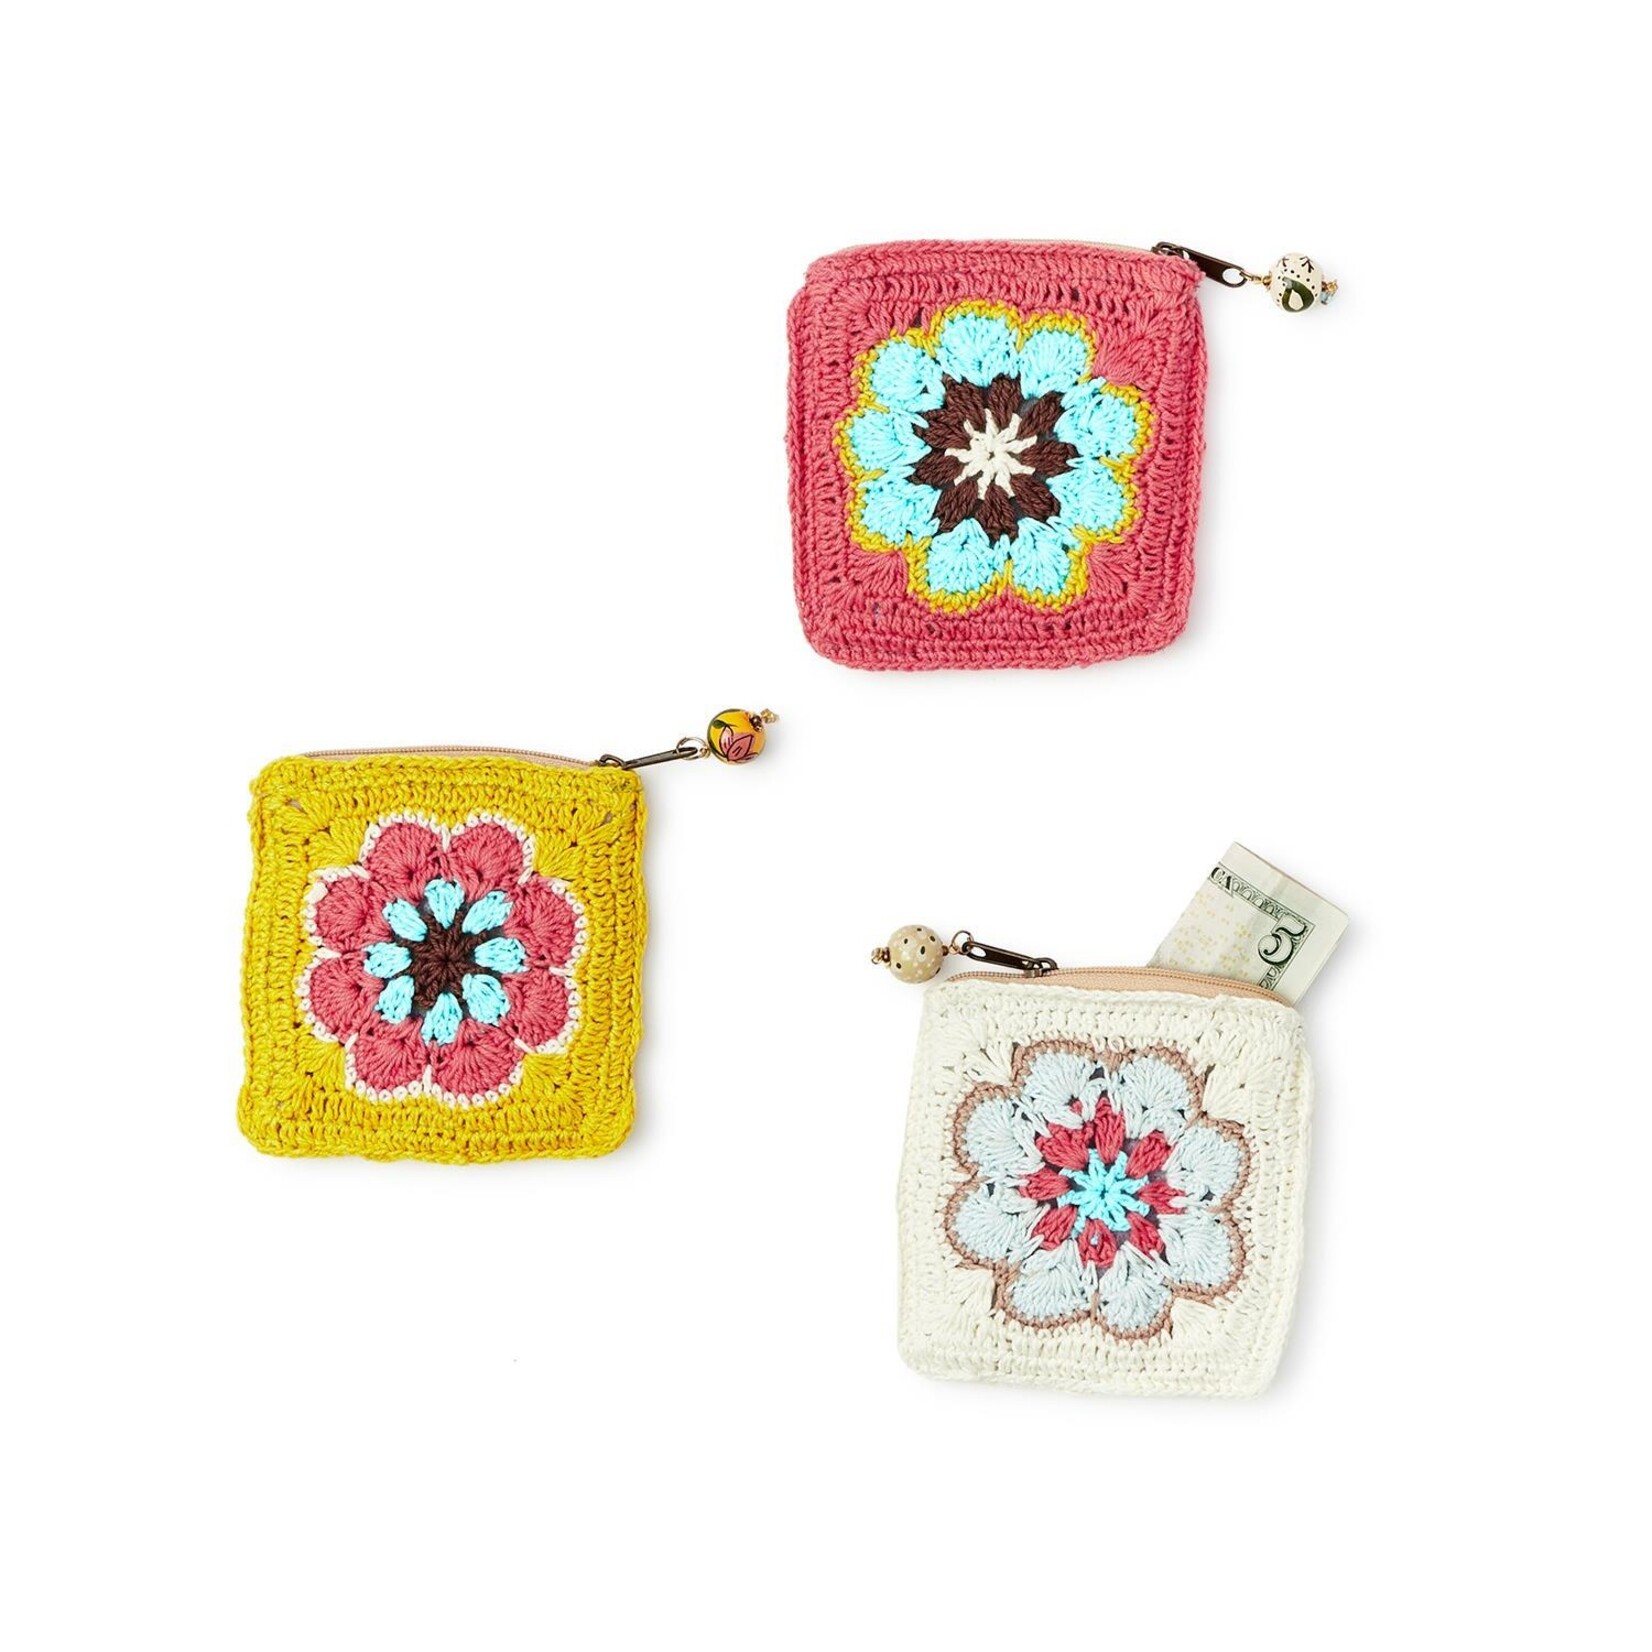 Two's Company Petals and Pennies Cotton Crochet Coin Purse with Hand Painted Bead Puller